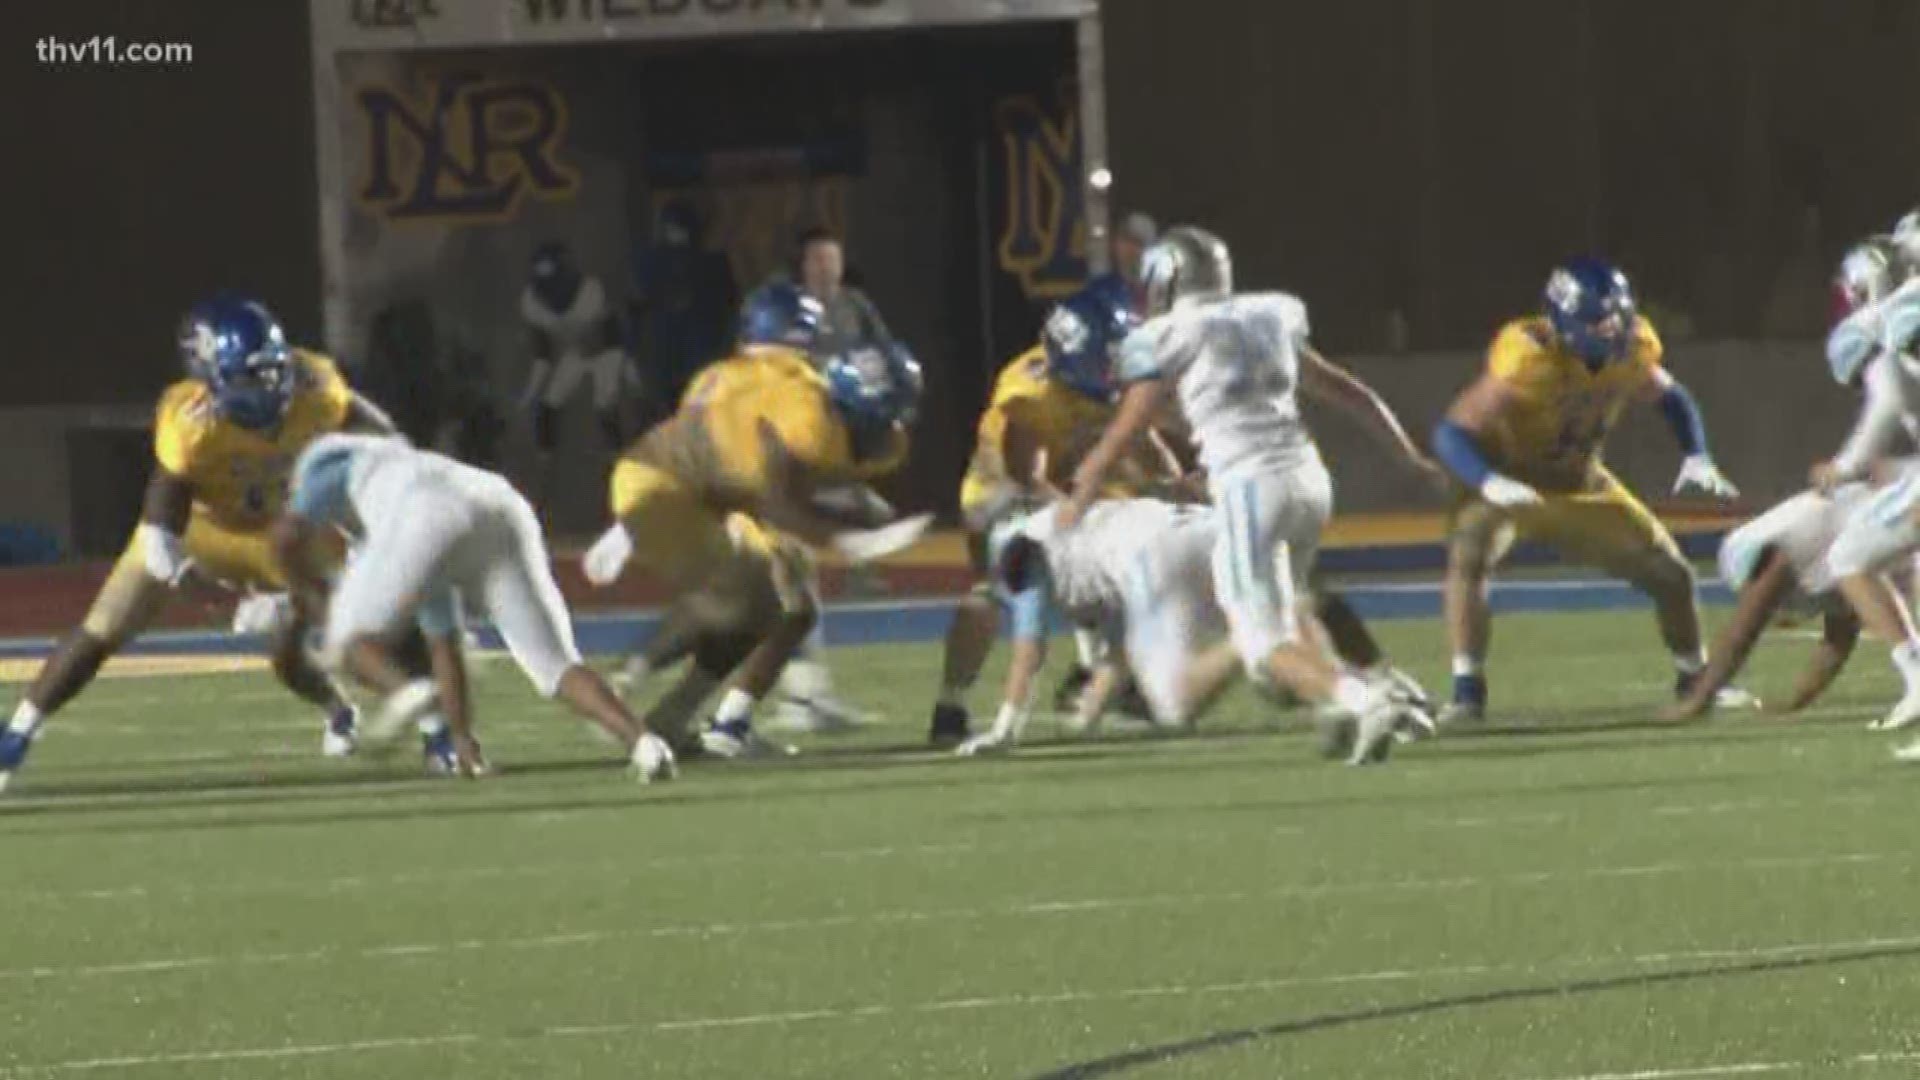 NLR Charging Wildcats win Yarnell's Sweetest Play of the Week for week 6